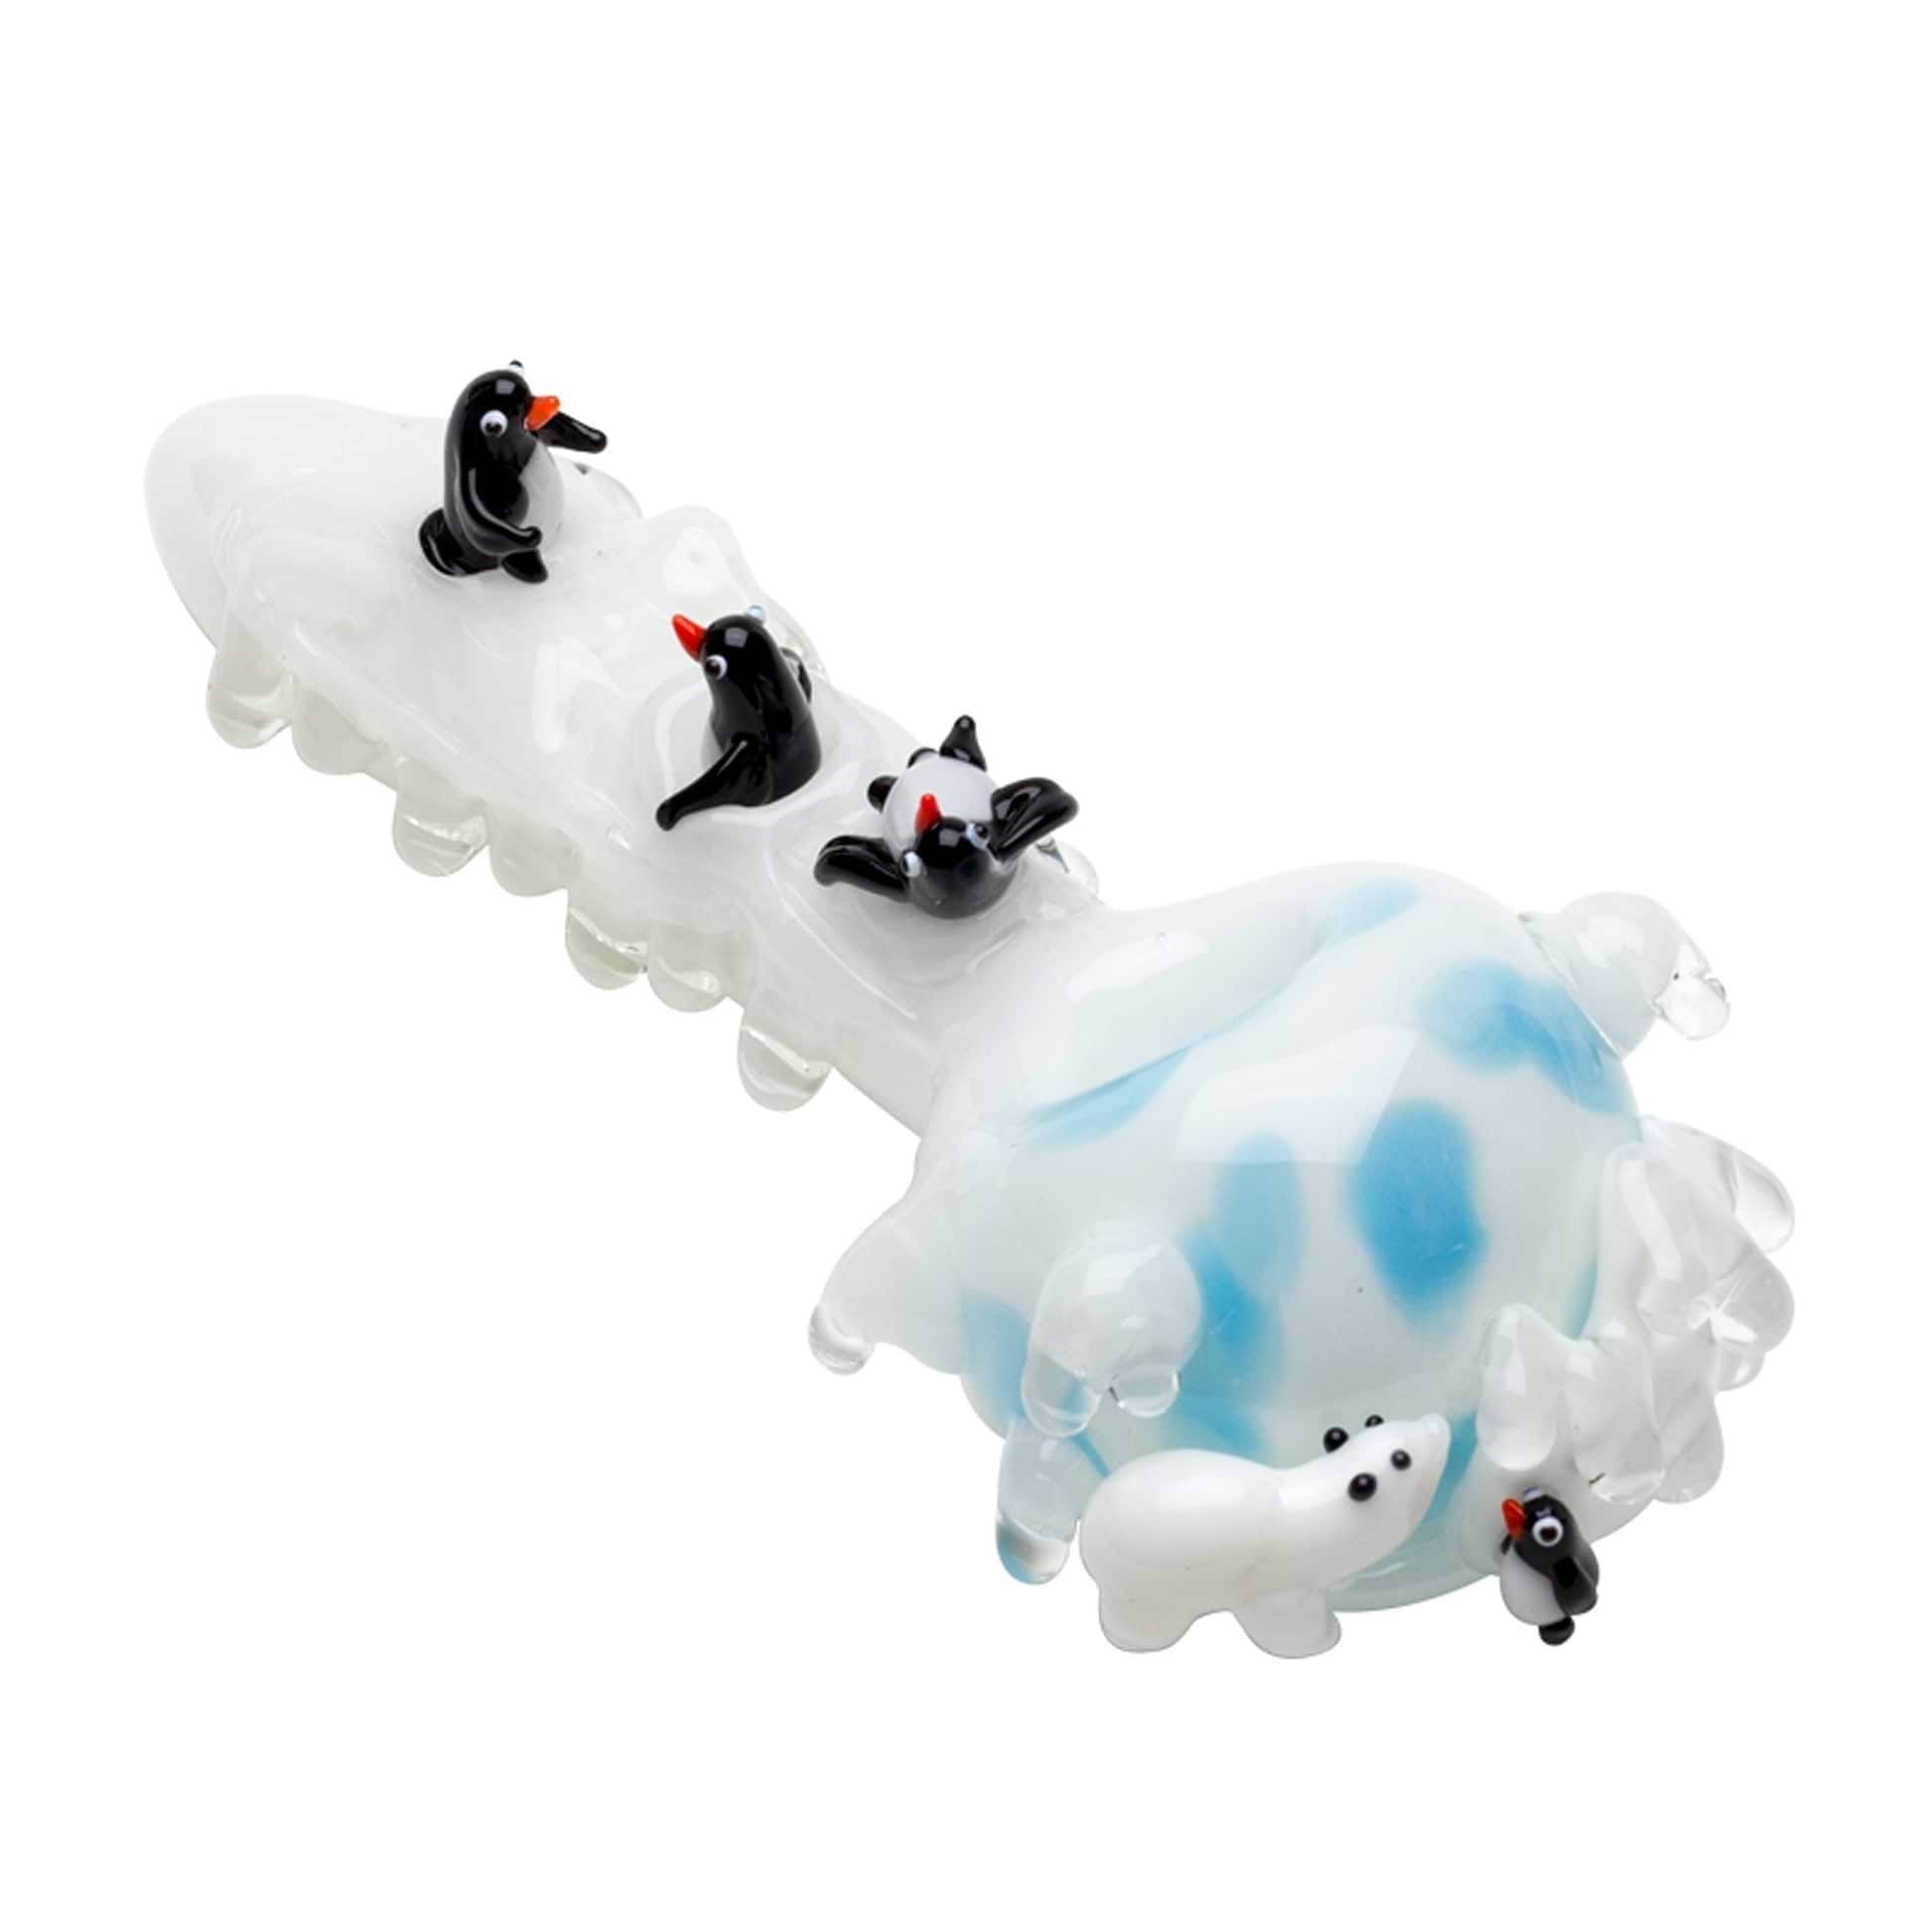 Empire Glassworks Icy Penguins Spoon Pipe - 6in